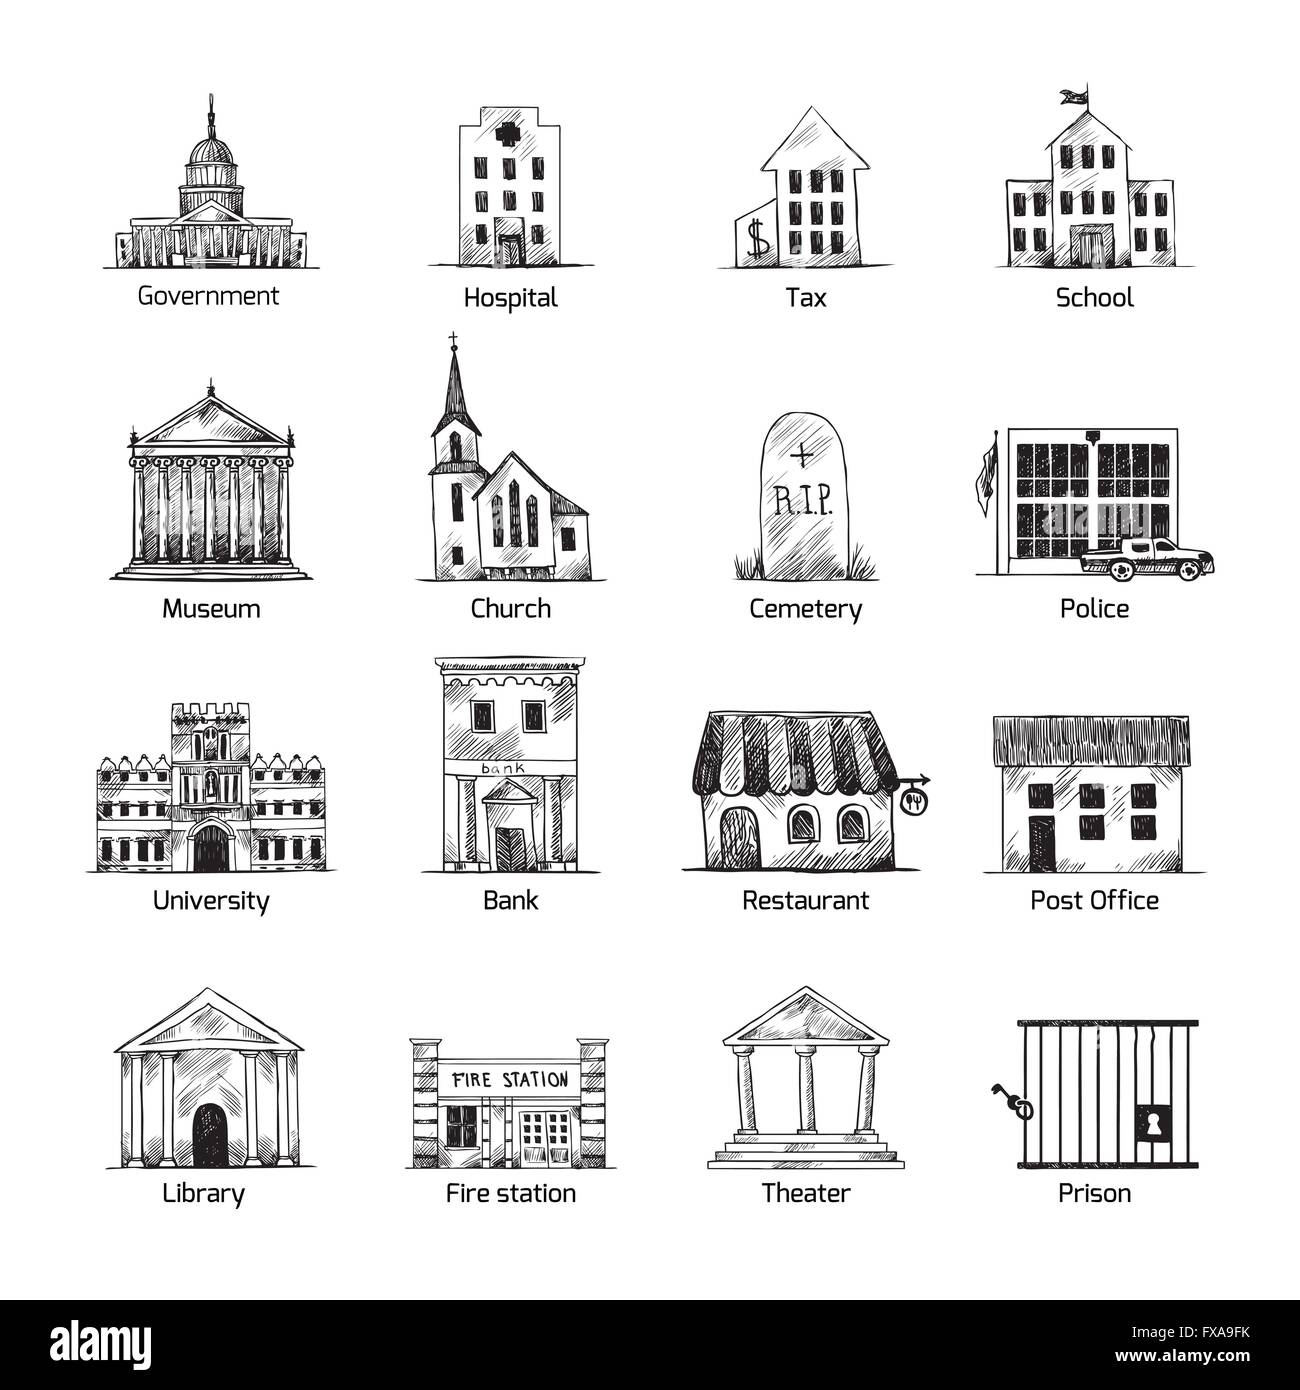 Government building icons set Stock Vector